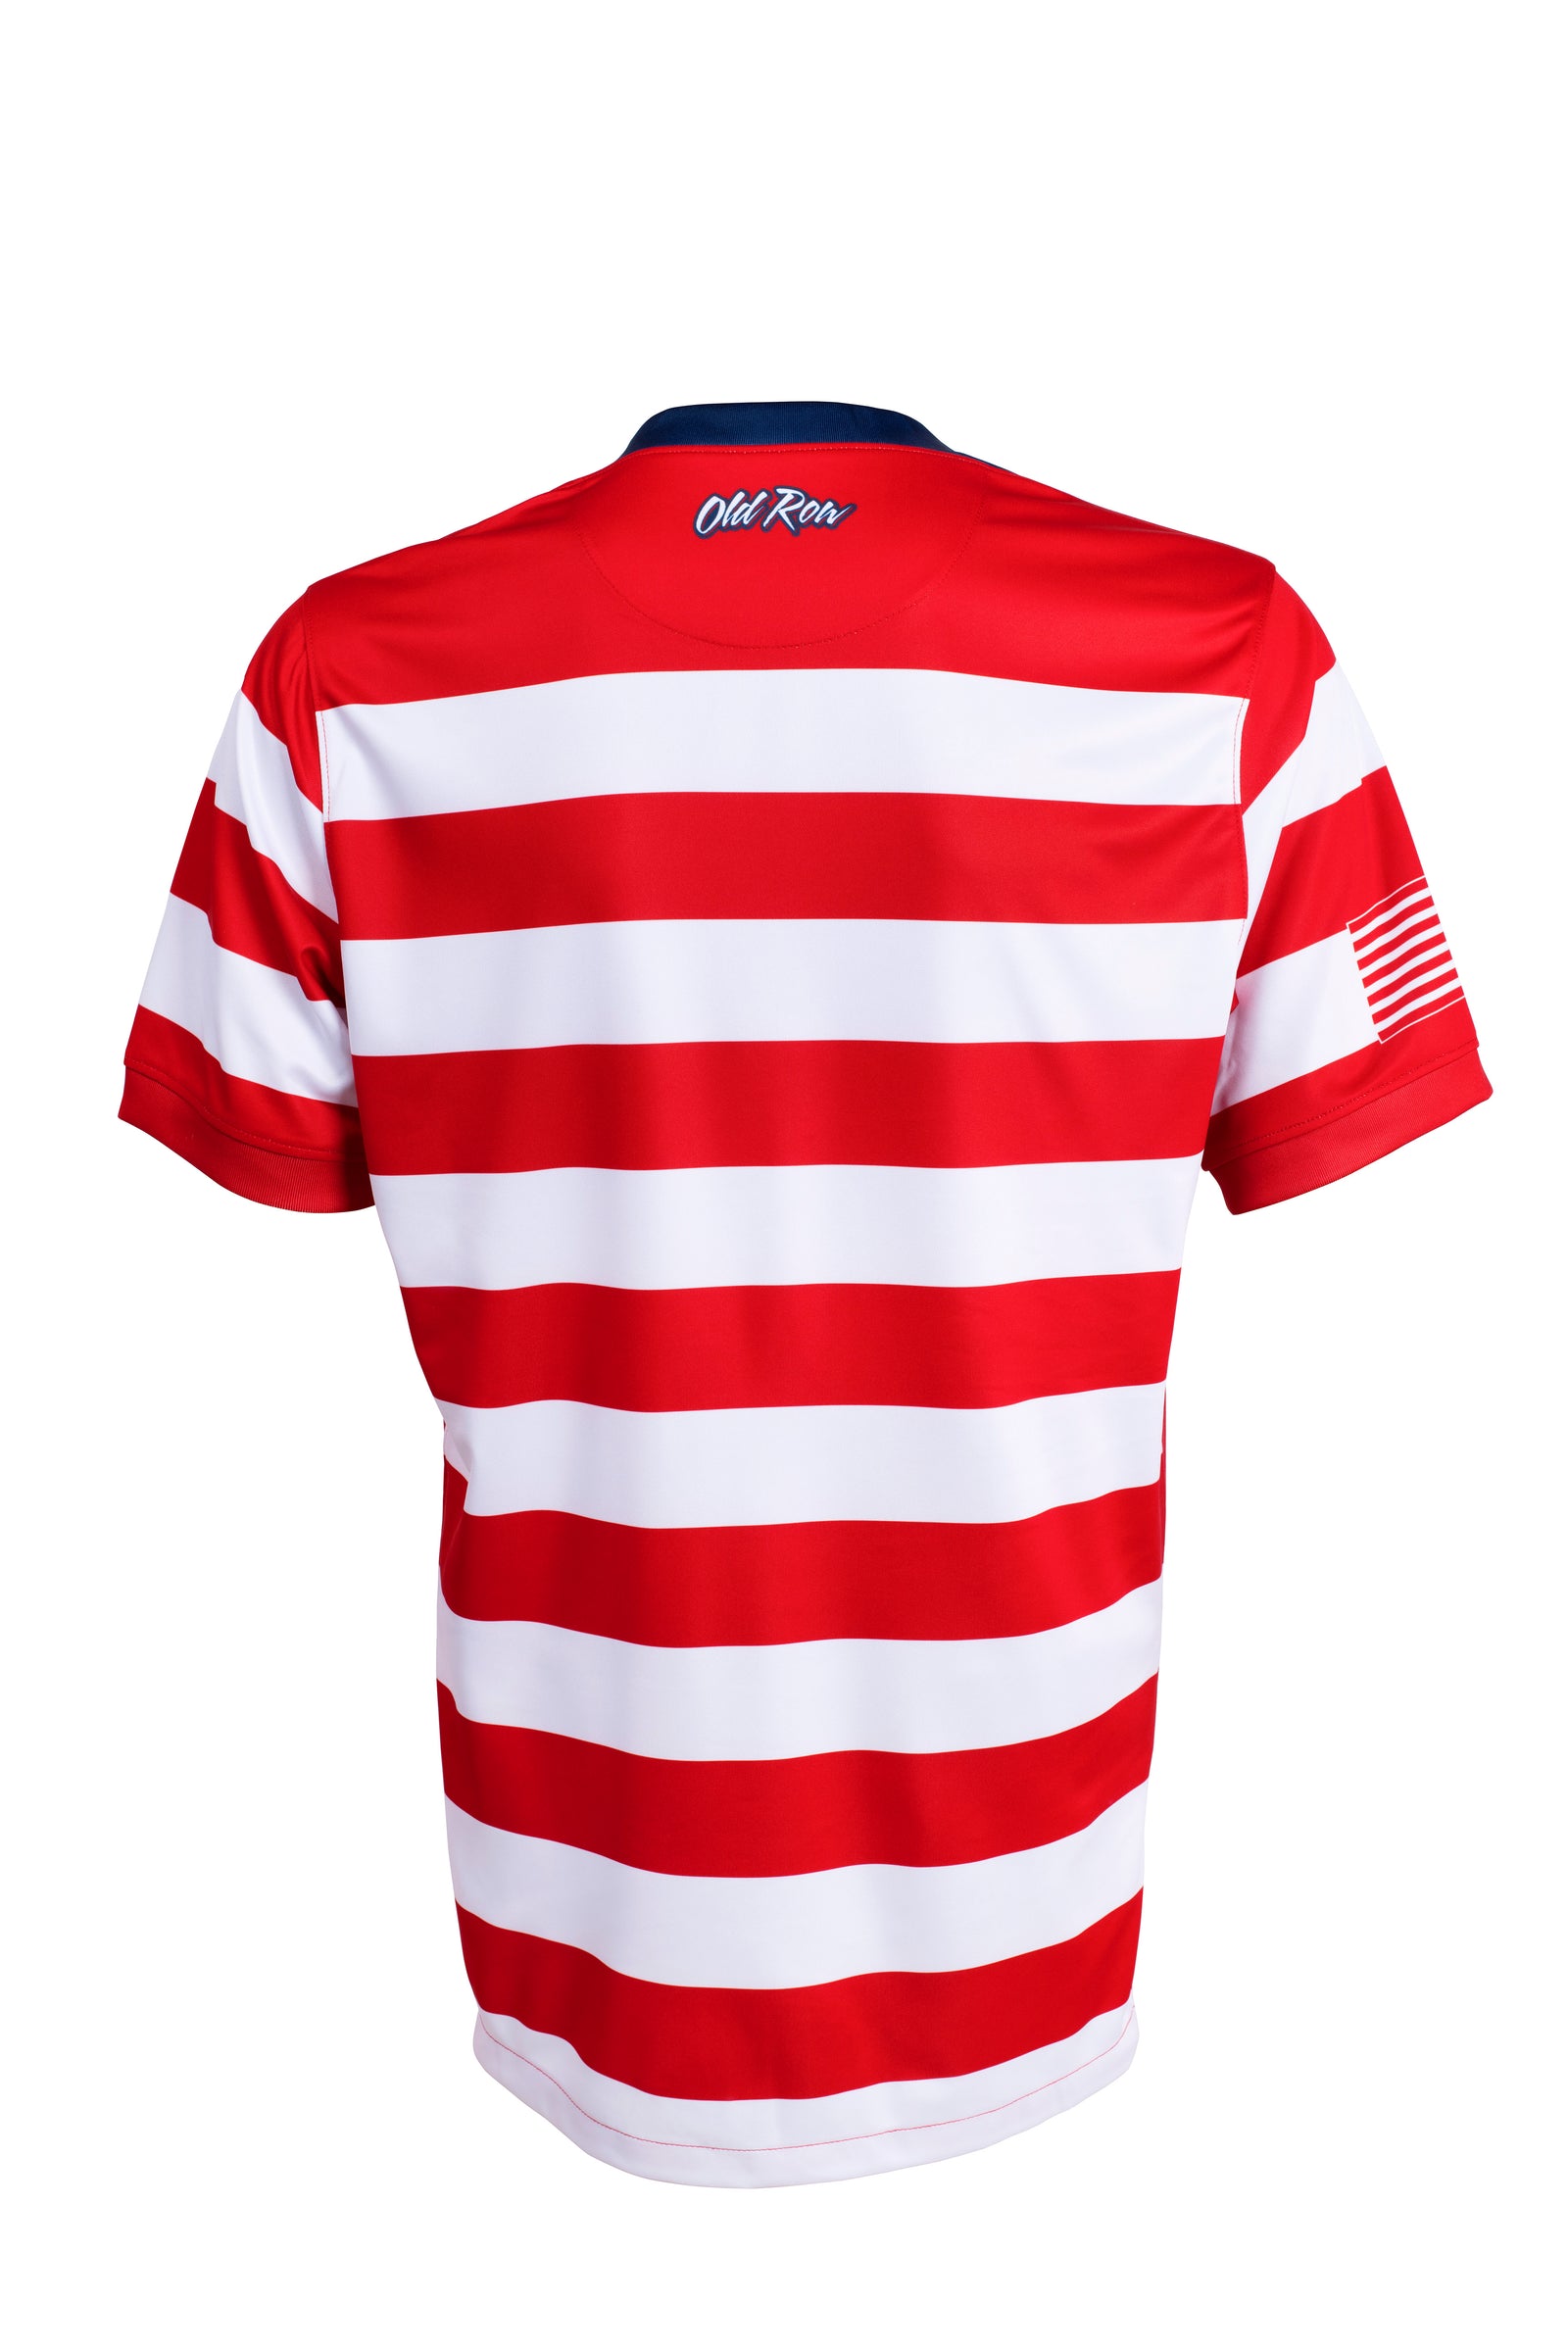 Old Row Soccer Striped Jersey